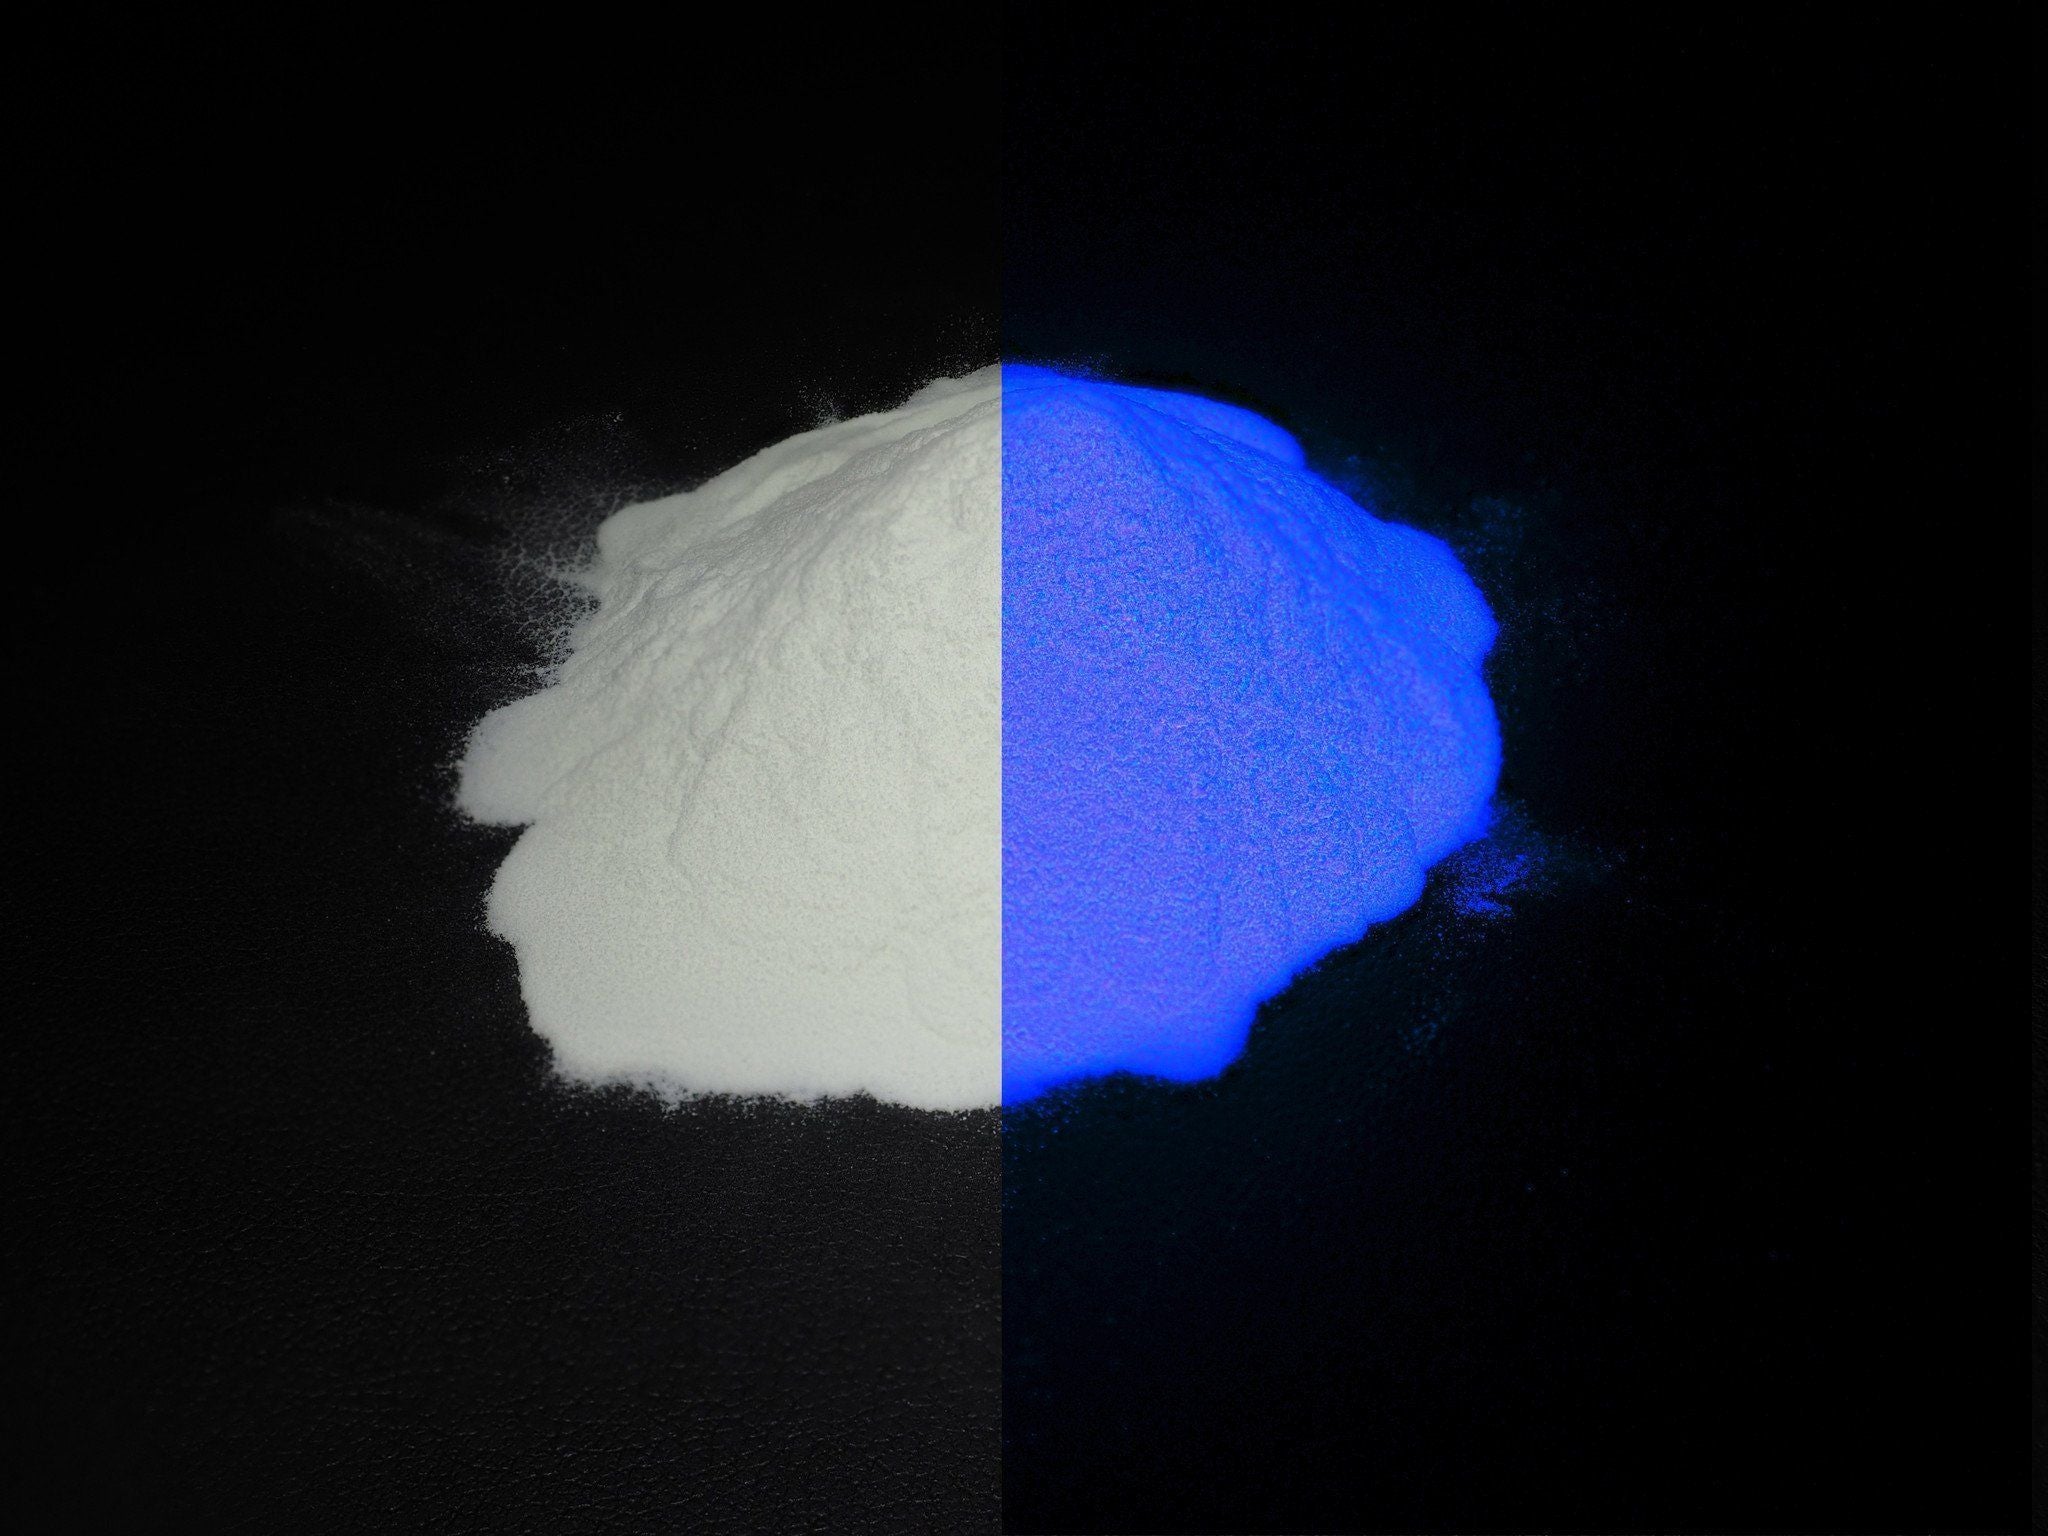 Glow In The Dark Pigment  Strong Glowing Powder - Baltic Day